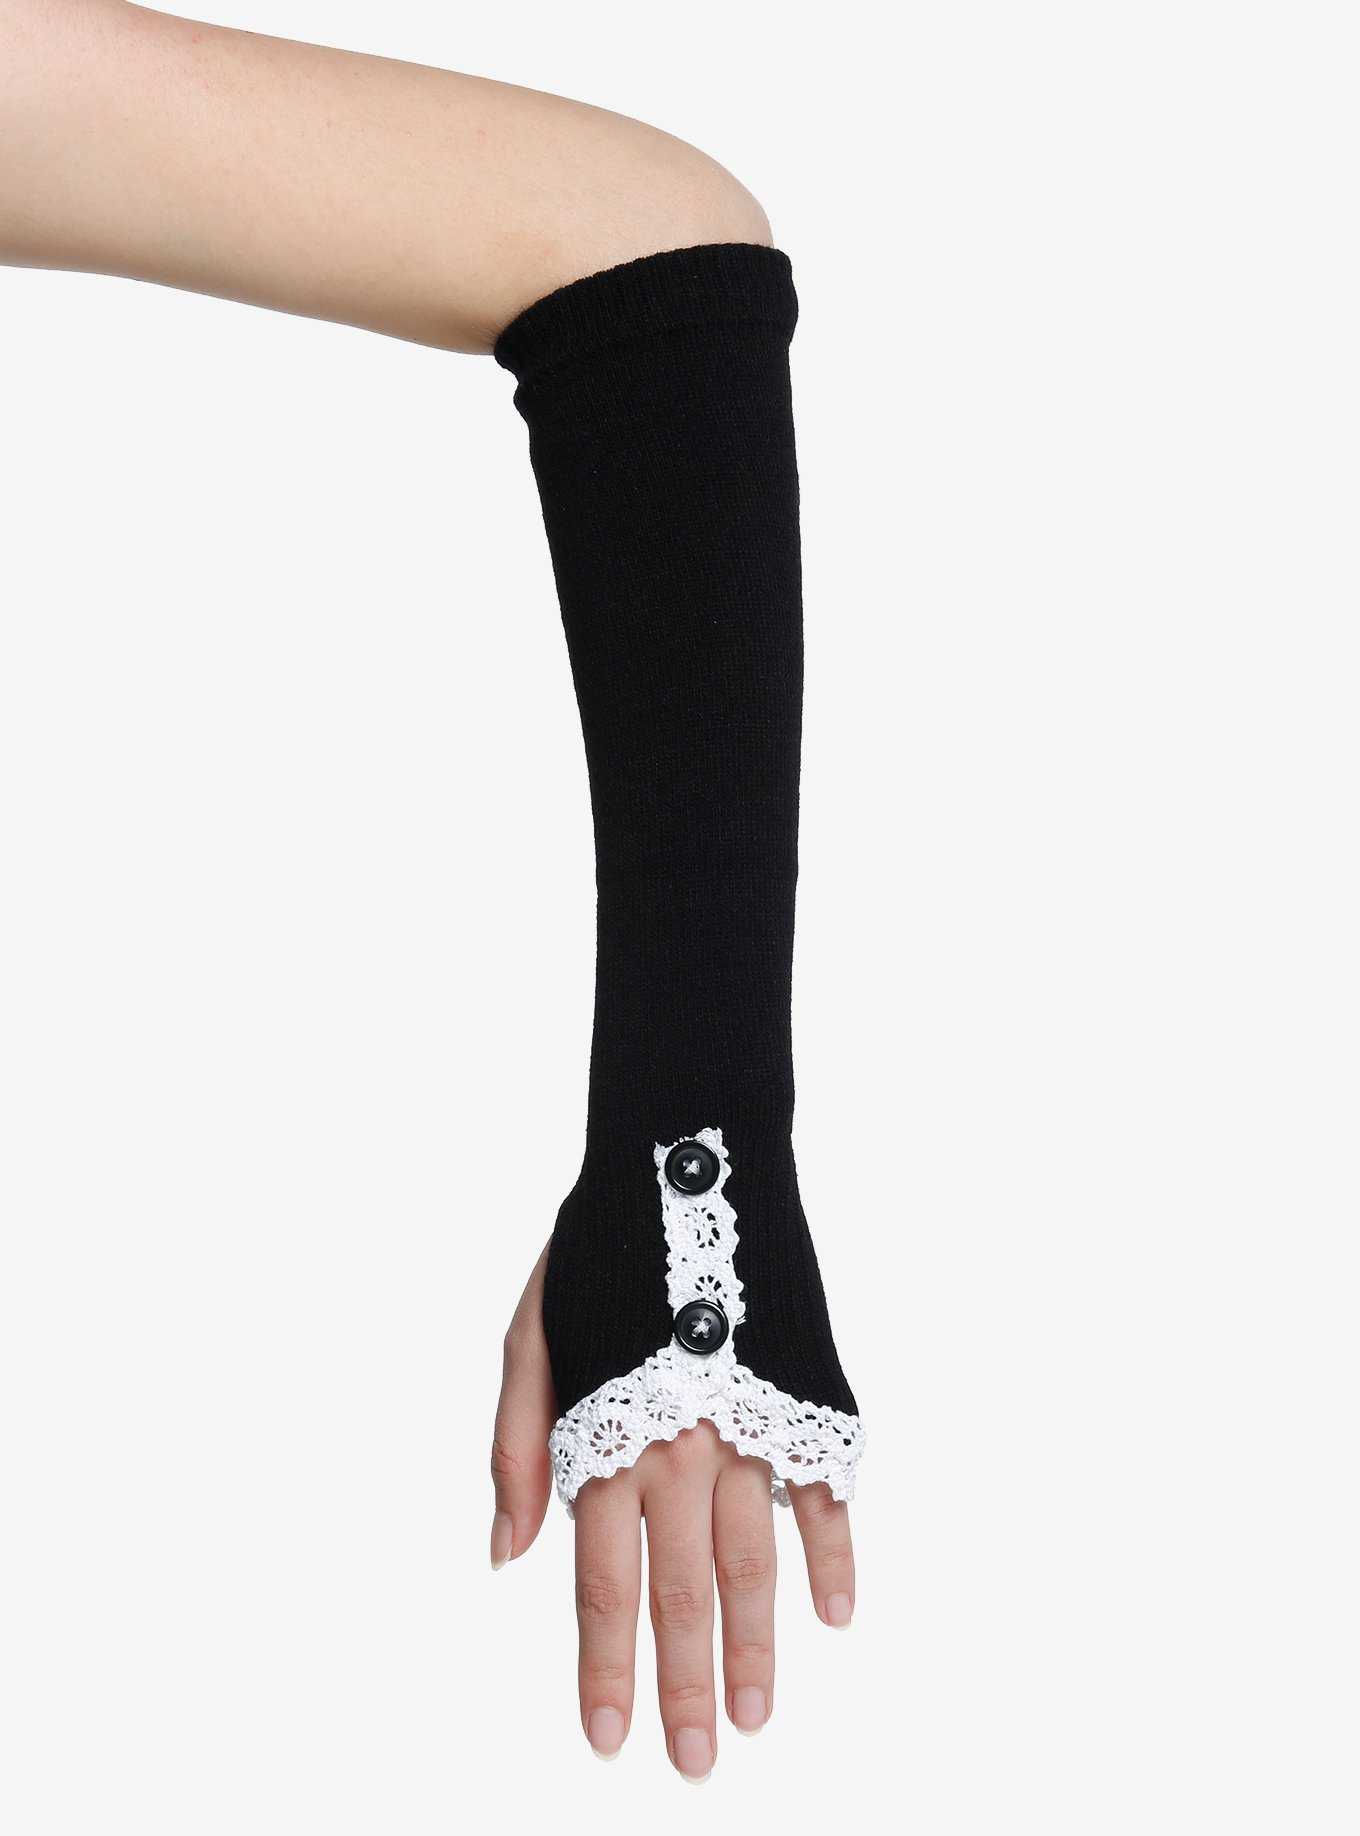 Black Knit White Lace Arm Warmers, , hi-res